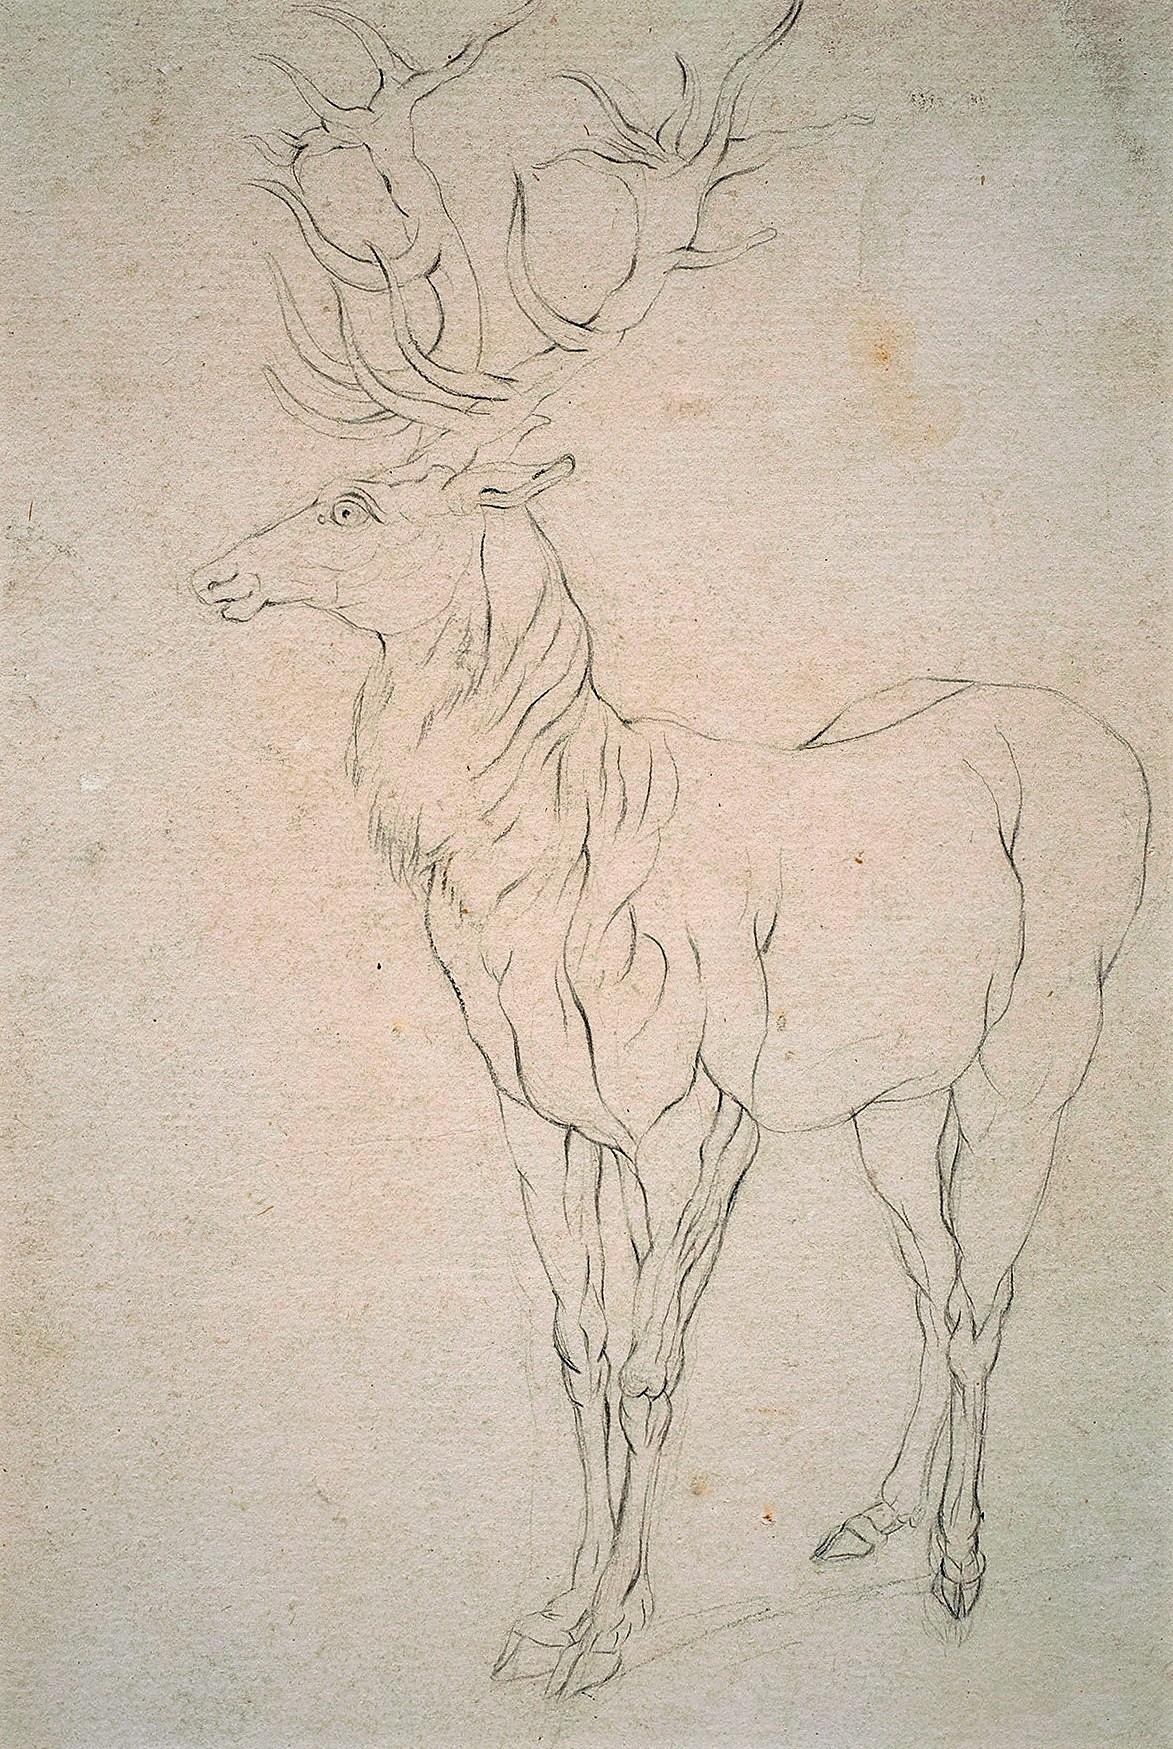 “Stag Looking Left”
Johann Elias Ridinger (German 1698-1767)
Black Chalk on paper
9 x 6 (16 ½ x 14 ½ frame) inches

Ridinger was the eighteenth-century German animalier par excellence. In over 1200 drawings he depicted many representatives of the